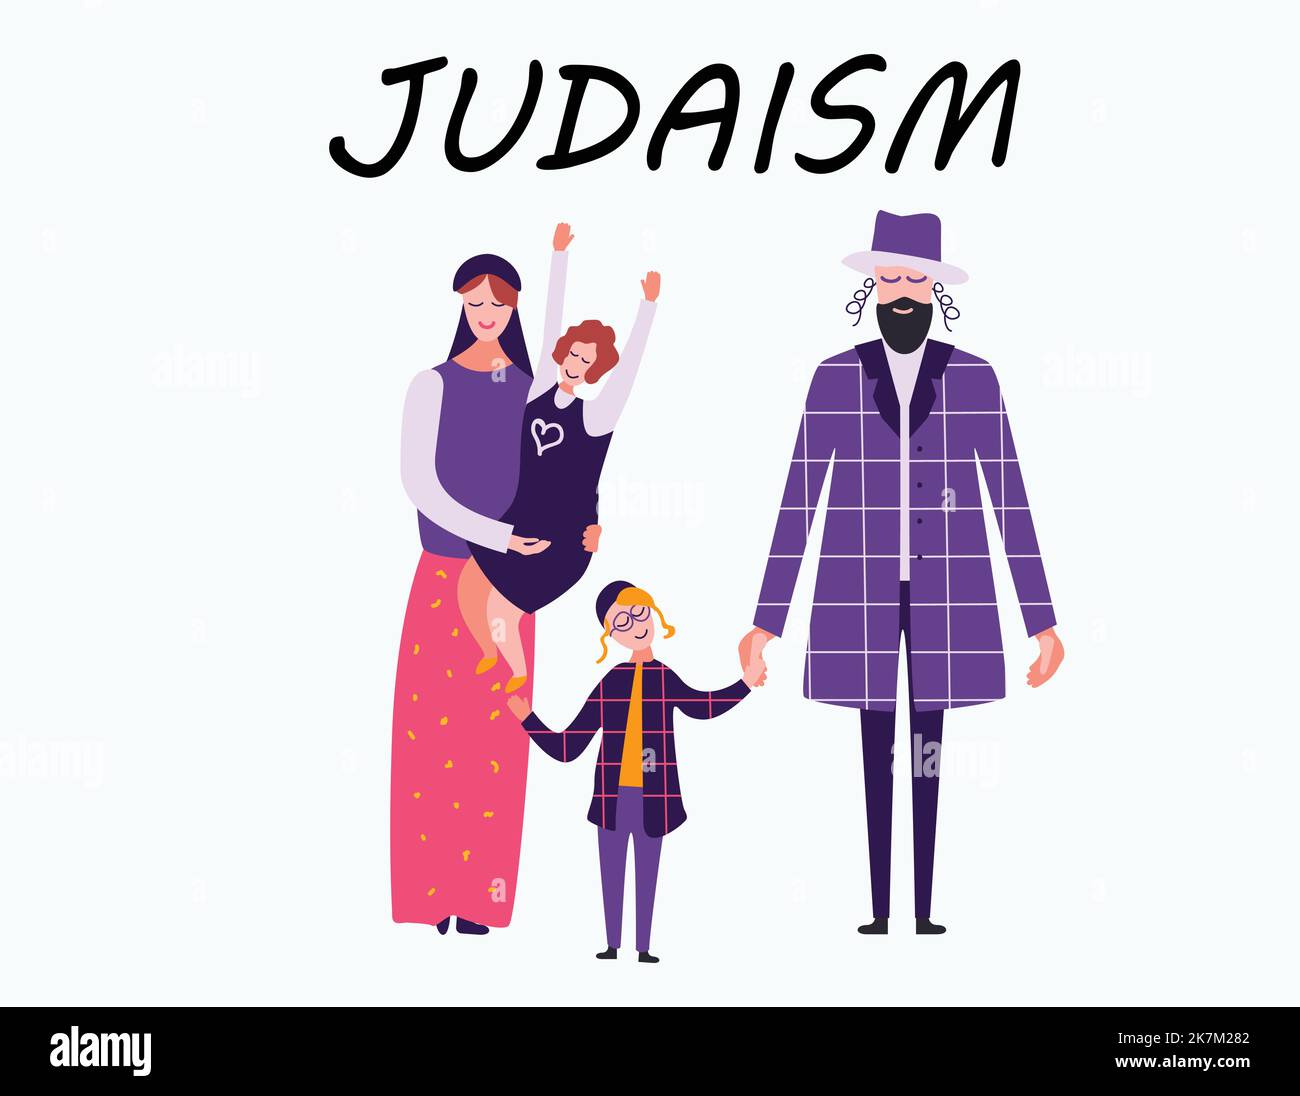 judaism religion traditional family character illustration Stock Vector